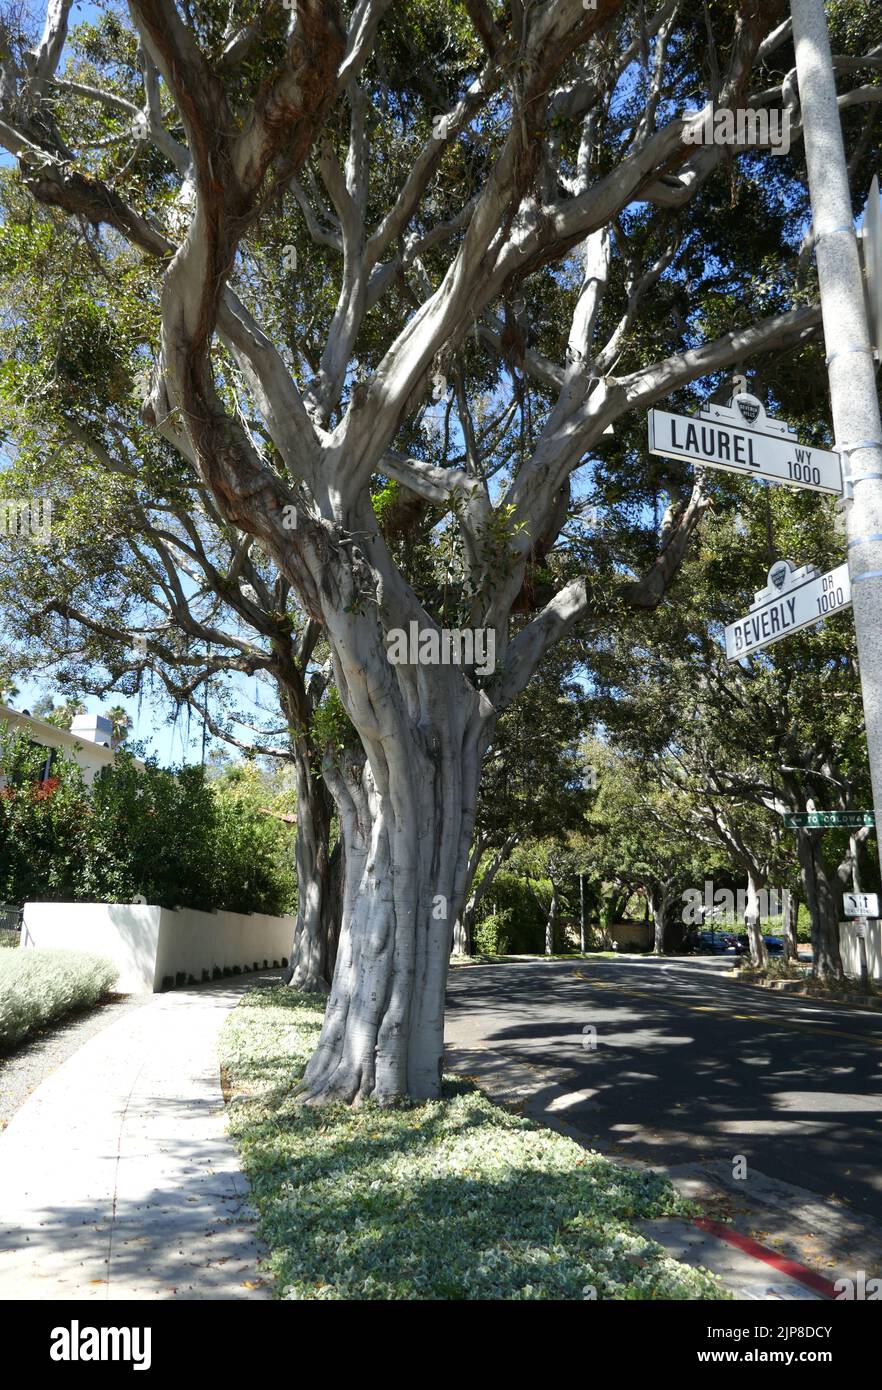 Beverly Hills, California, USA 15th August 2022 Beverly Drive and Laurel Way on August 15, 2022 in Beverly Hills, California, USA. Photo by Barry King/Alamy Stock Photo Stock Photo